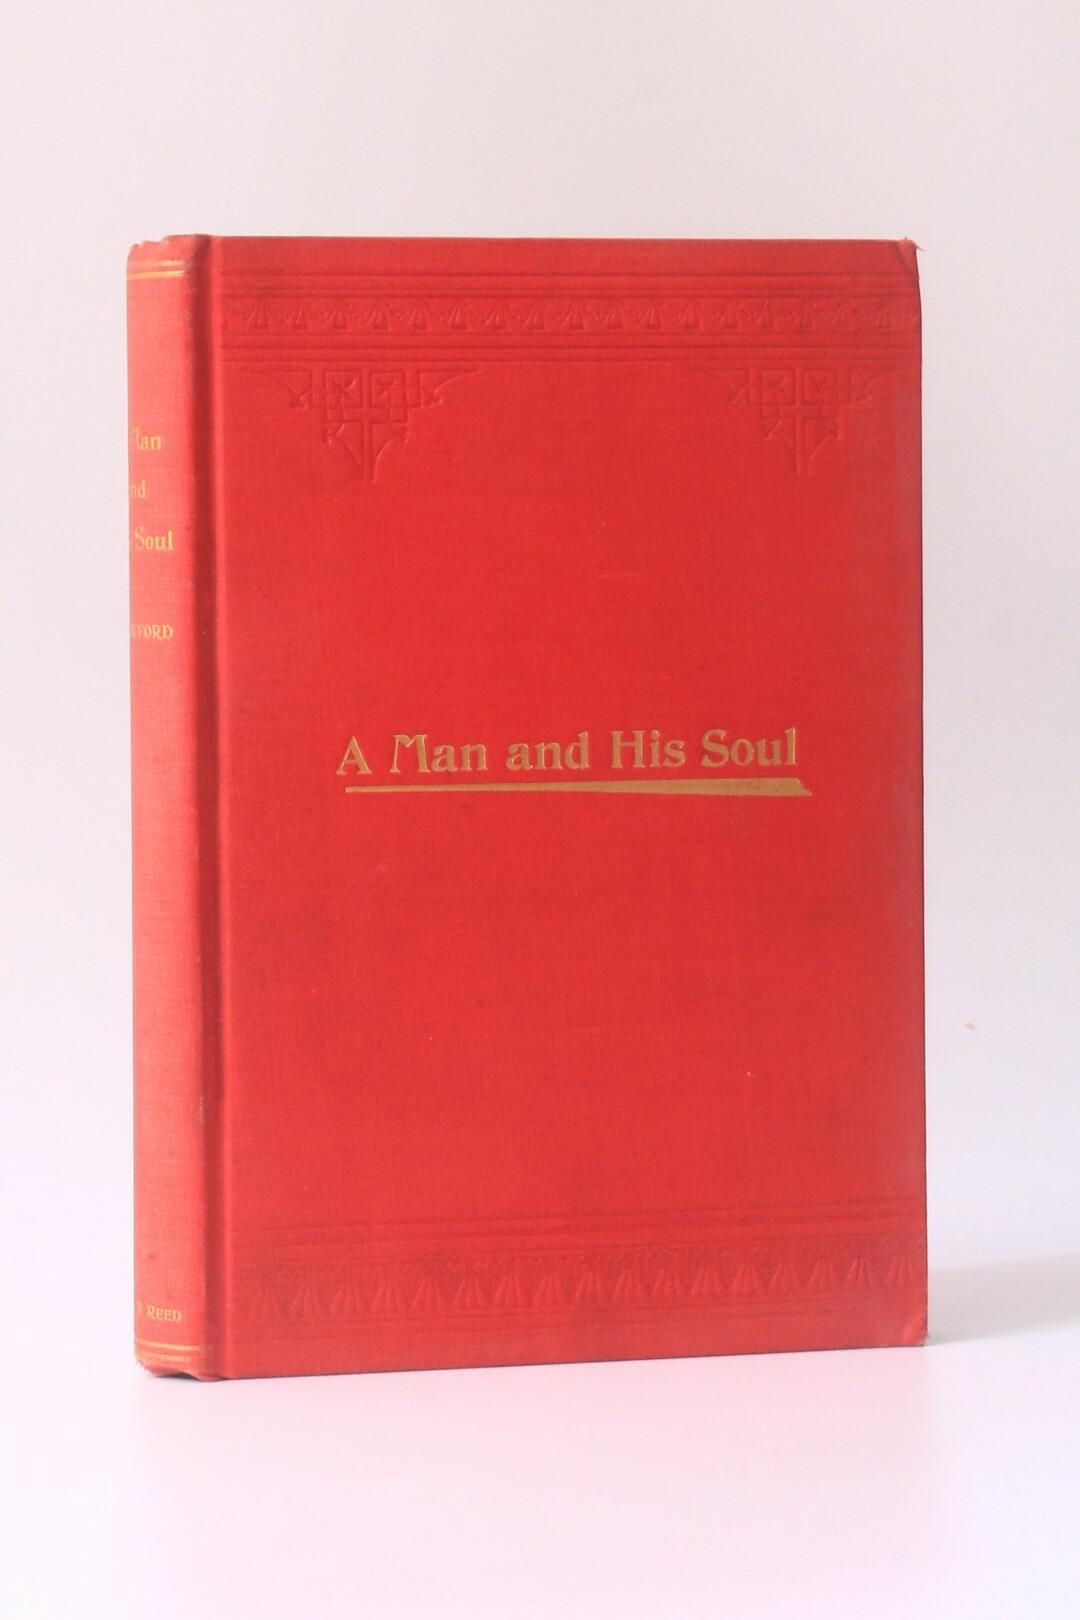 T.C. Crawford - A Man and His Soul: An Occult Romance of Washington Life - Charles B. Read, 1894, First Edition.